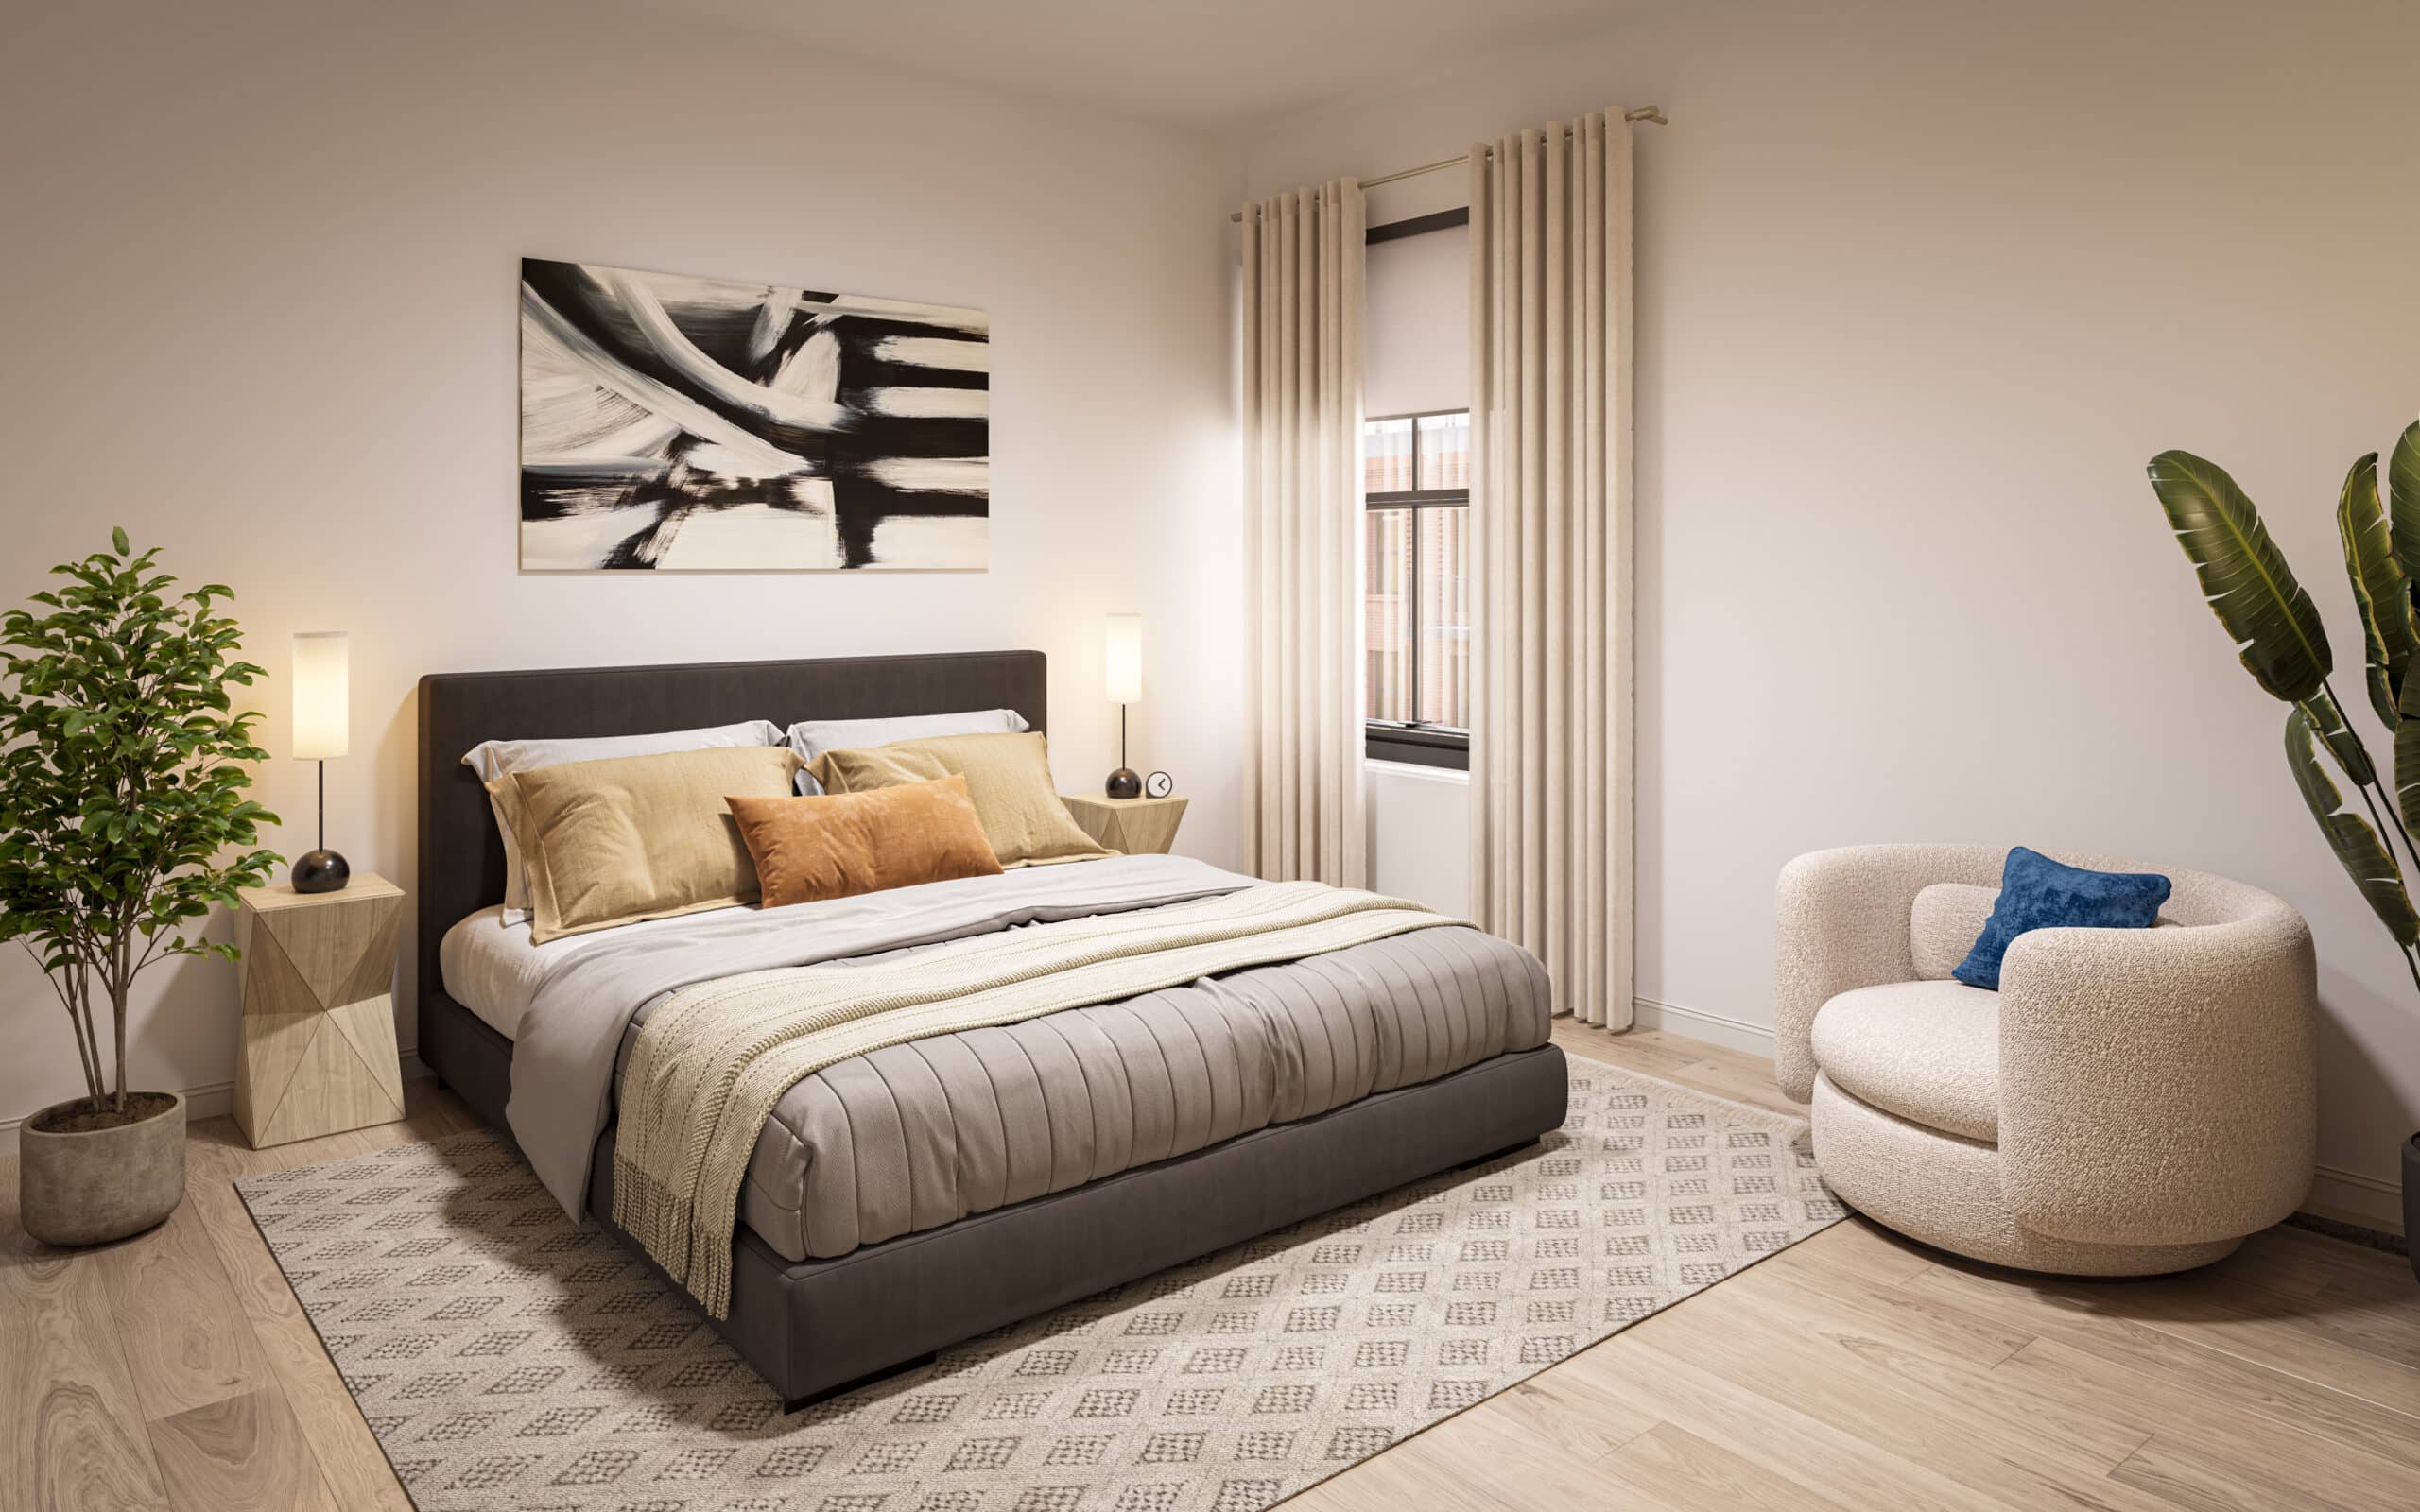 Luxury apartment bedroom with classy furnishings